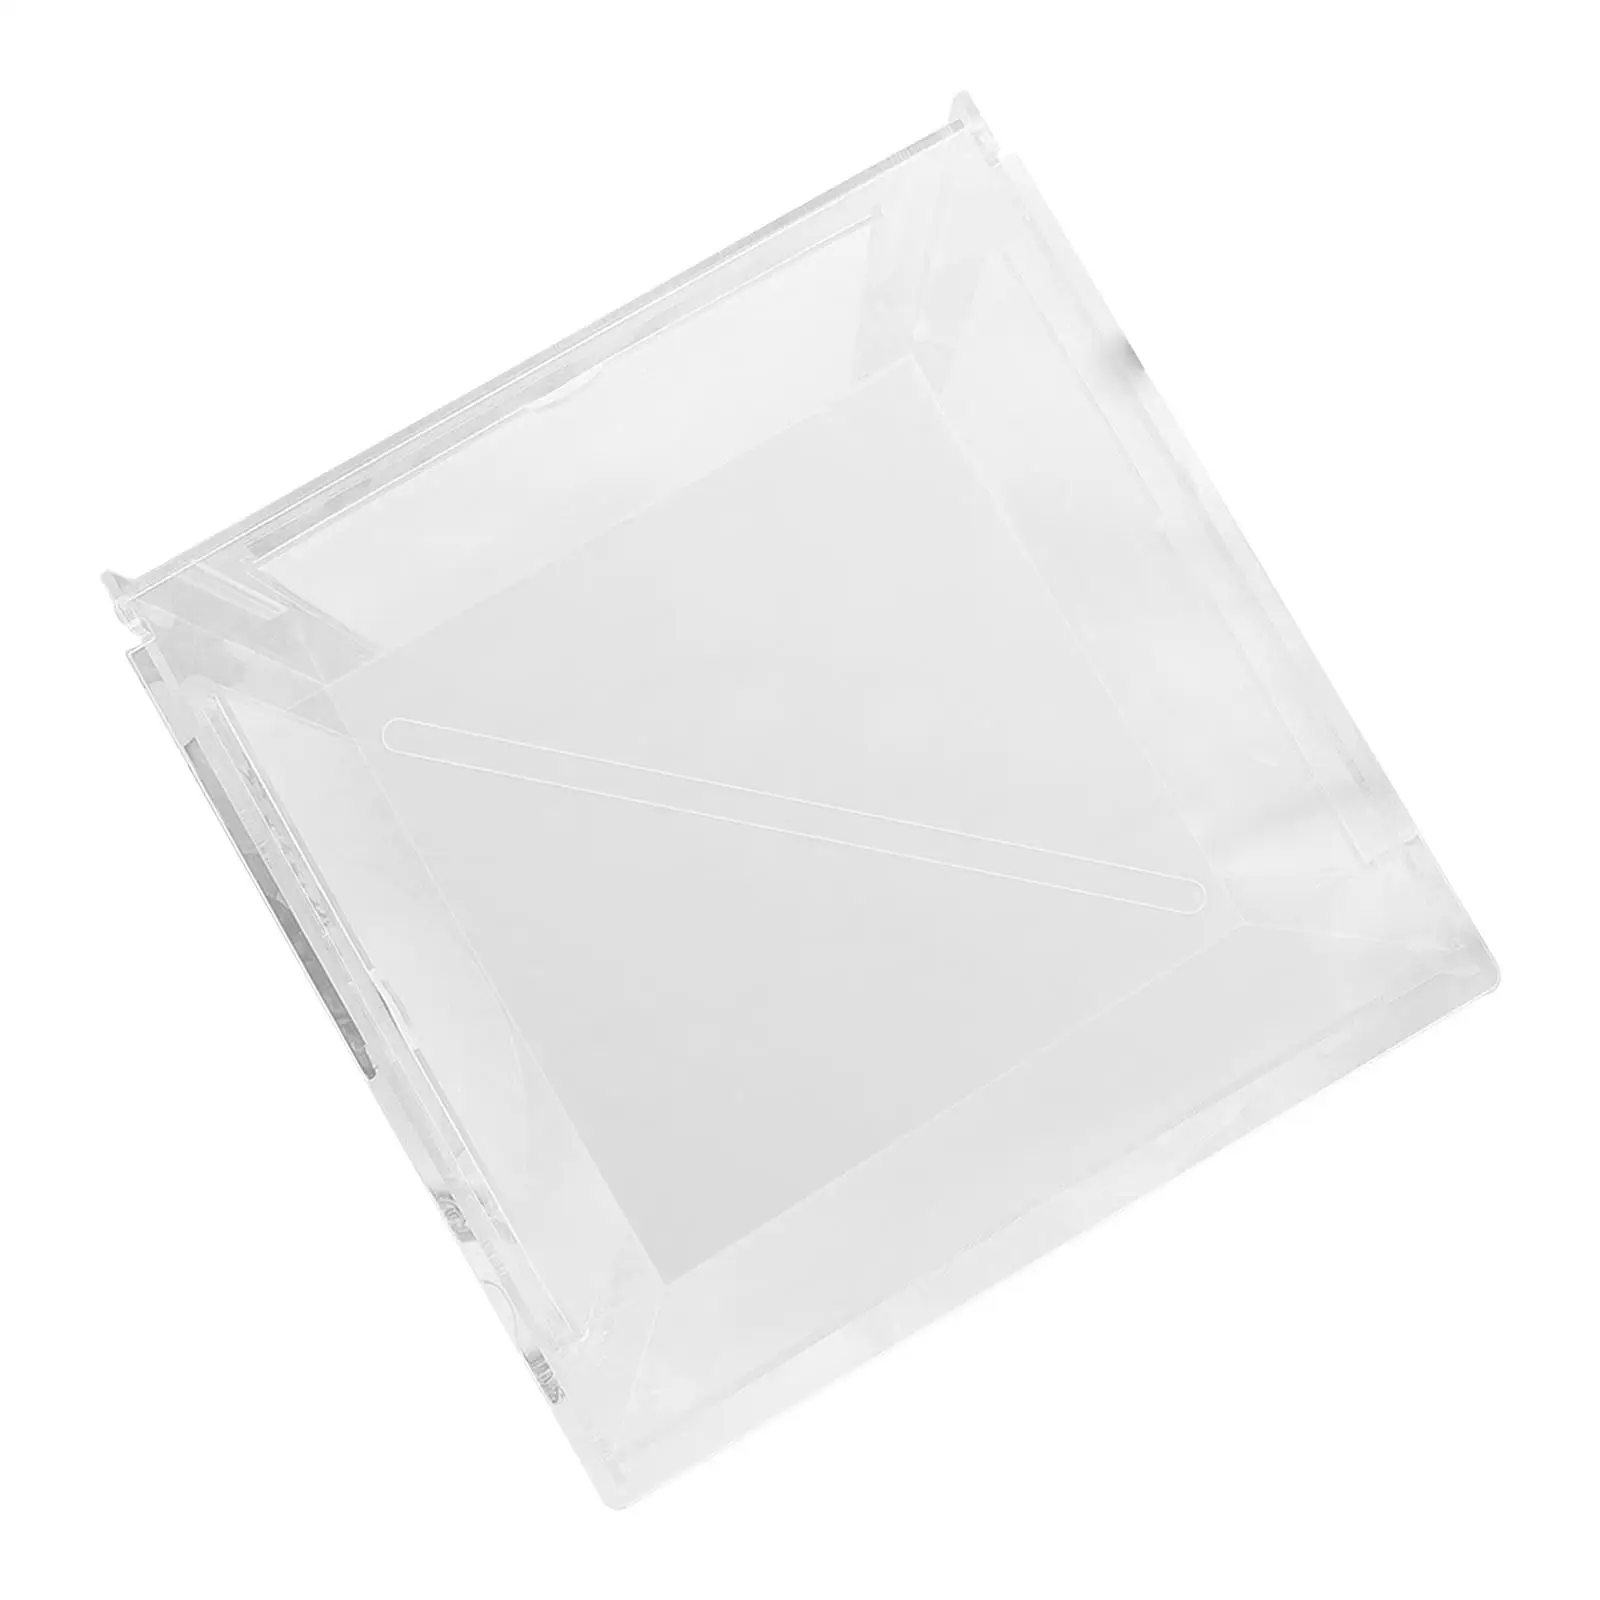 post Gift Box Holder Clear Acrylic with Slot Rotatable Envelope Post for Party Commencement Ceremony Anniversary Bride